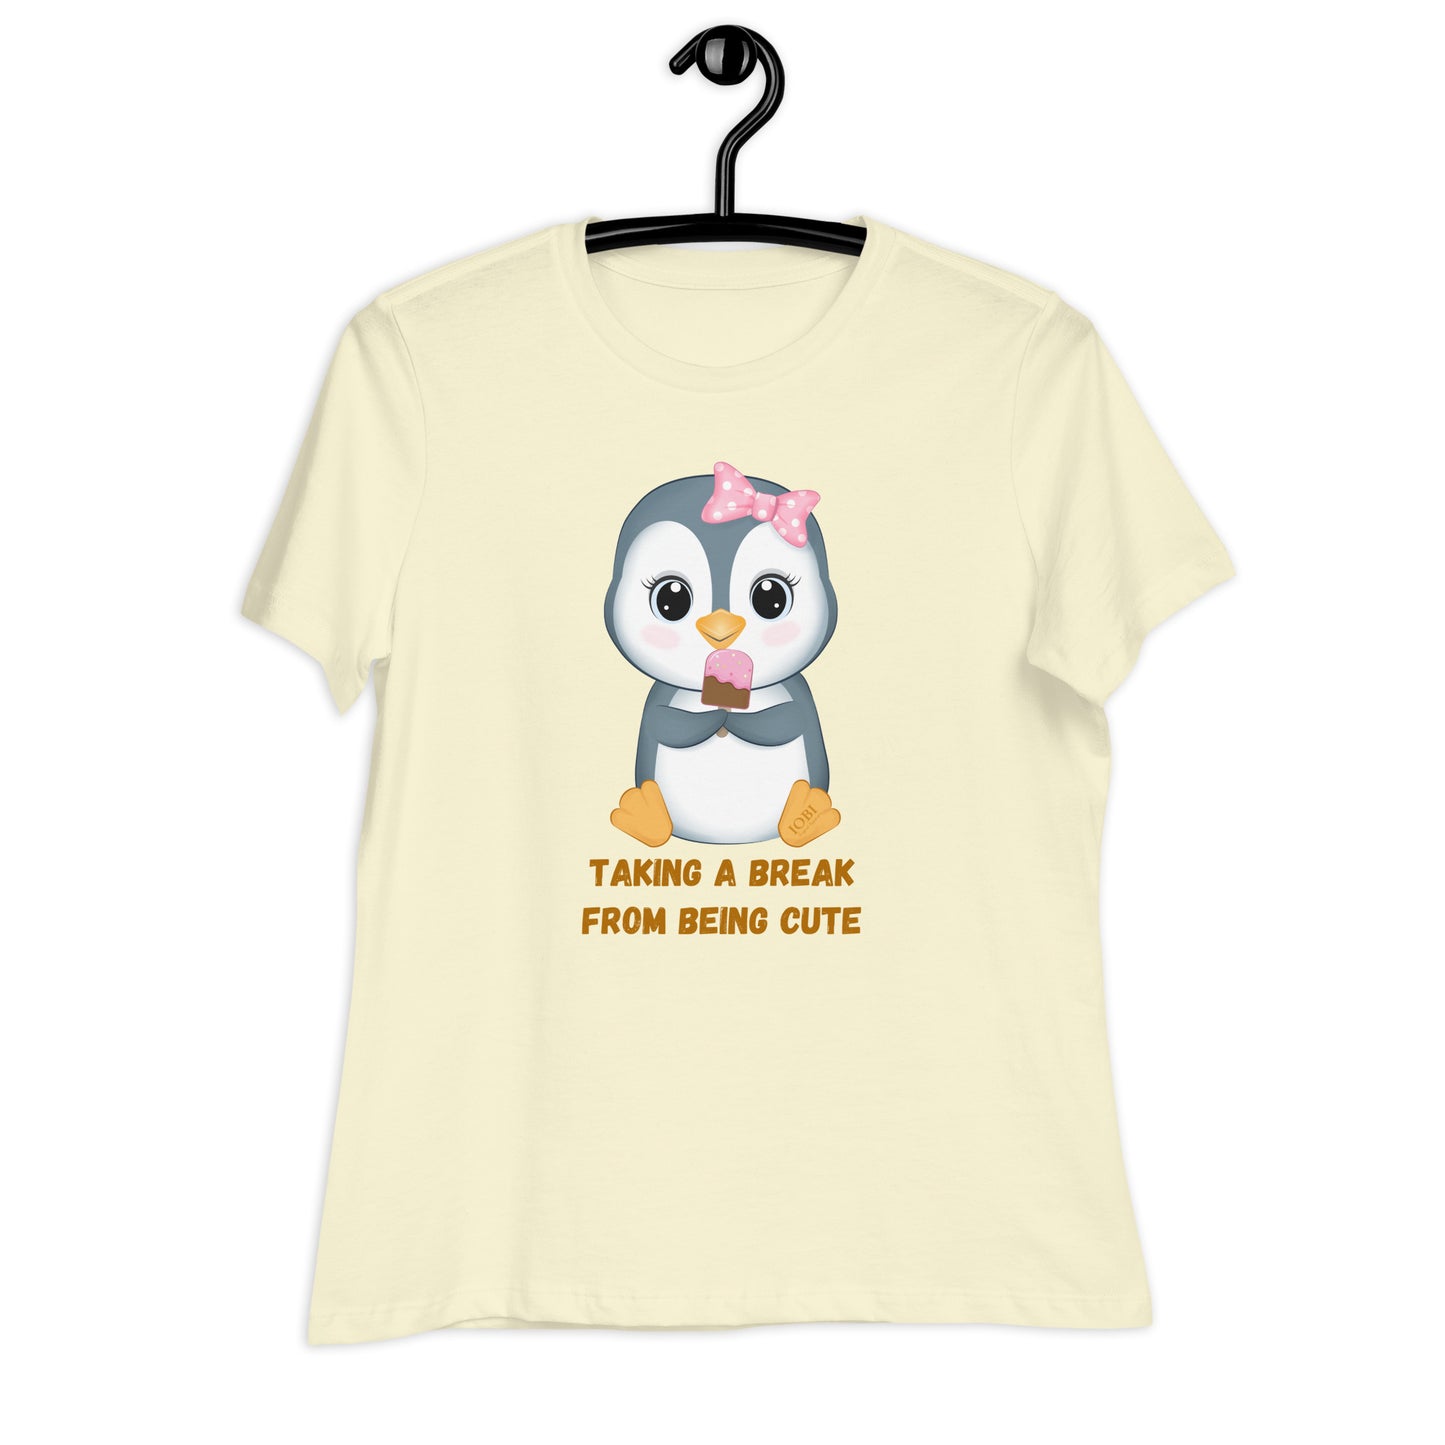 Women's Relaxed Soft & Smooth Premium Quality T-Shirt Taking A Break From Being Cute Penguin Design by IOBI Original Apparel